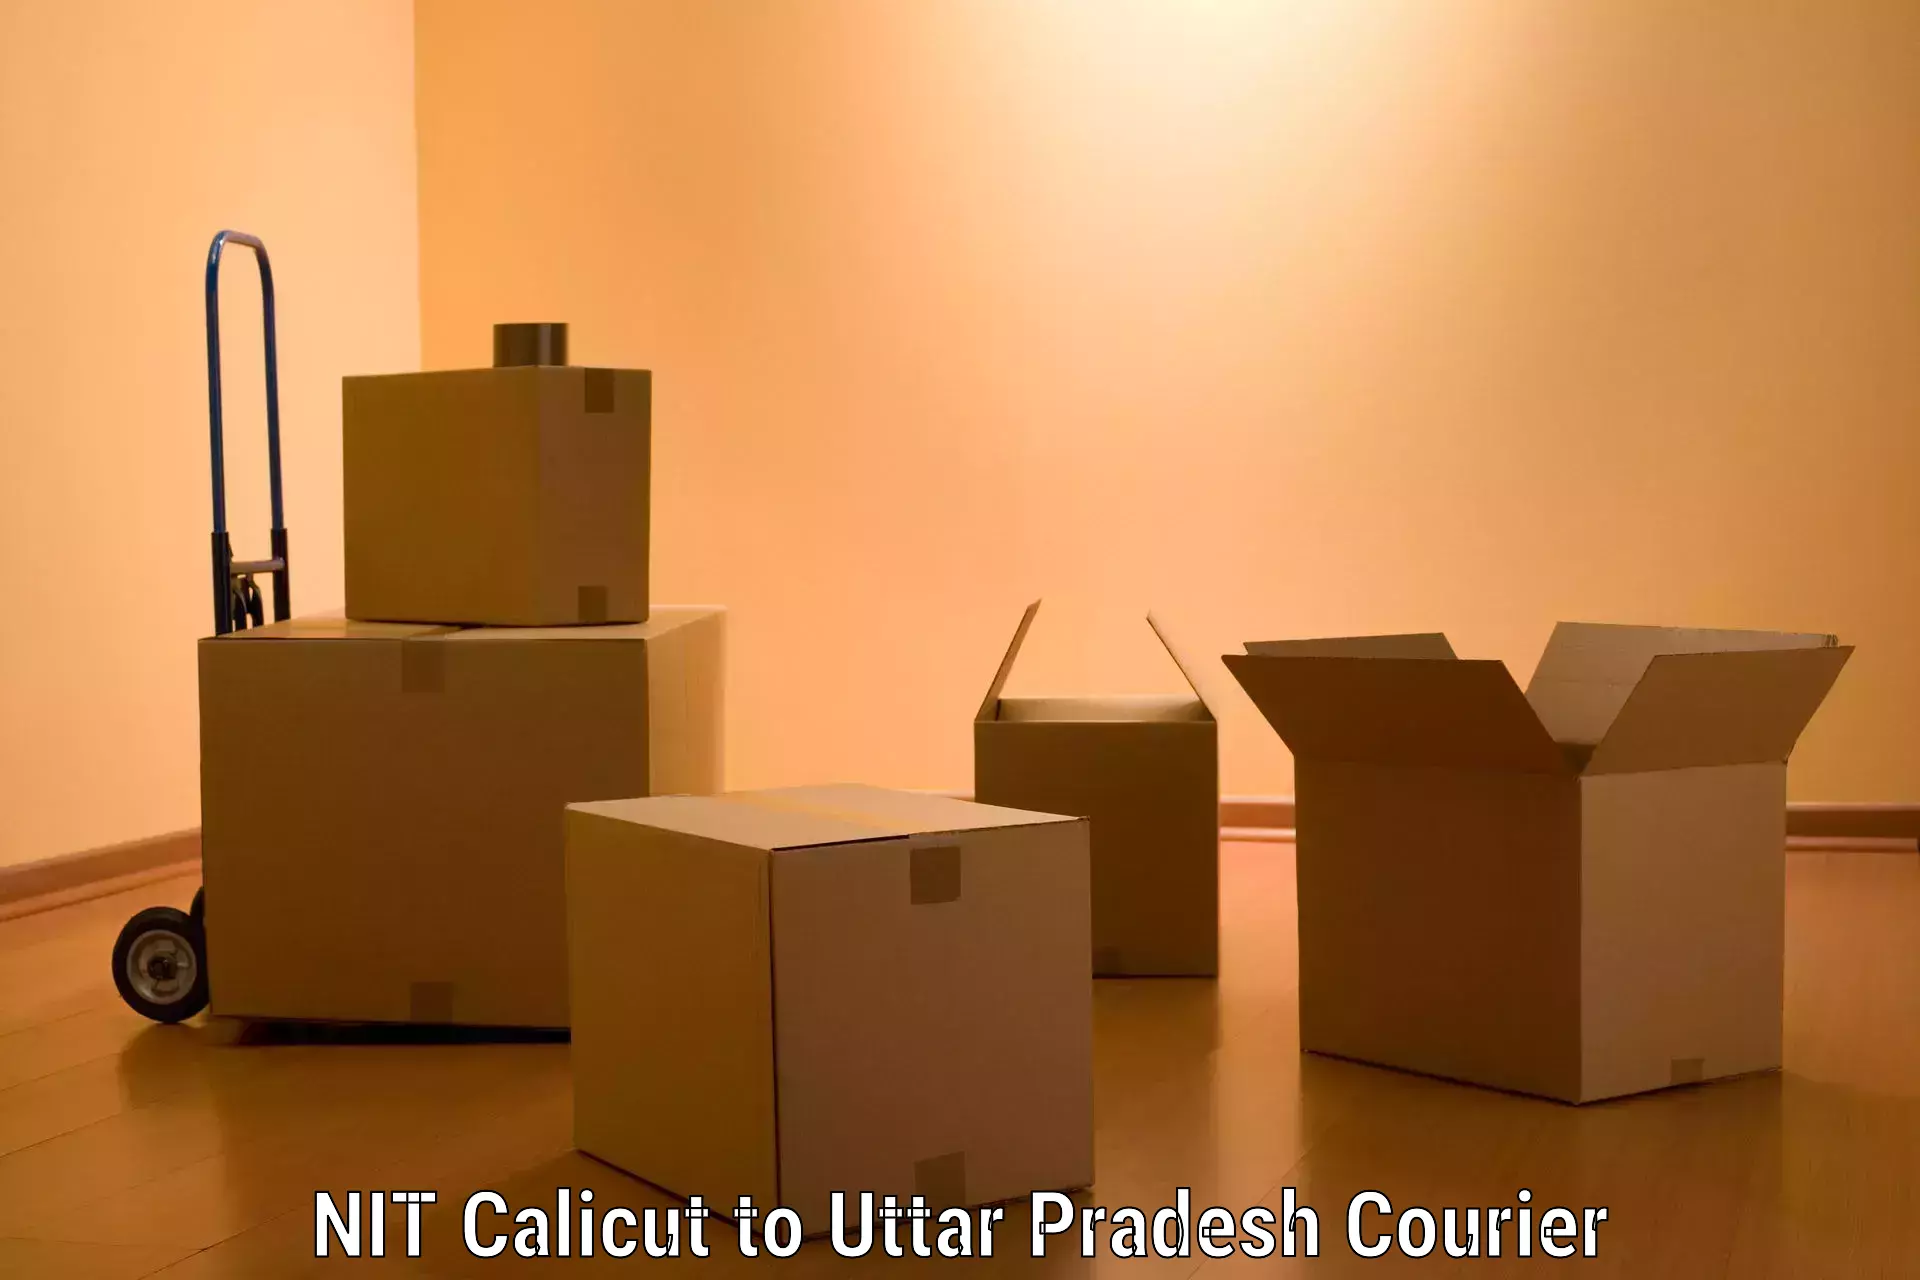 Professional relocation services NIT Calicut to IIT Kanpur